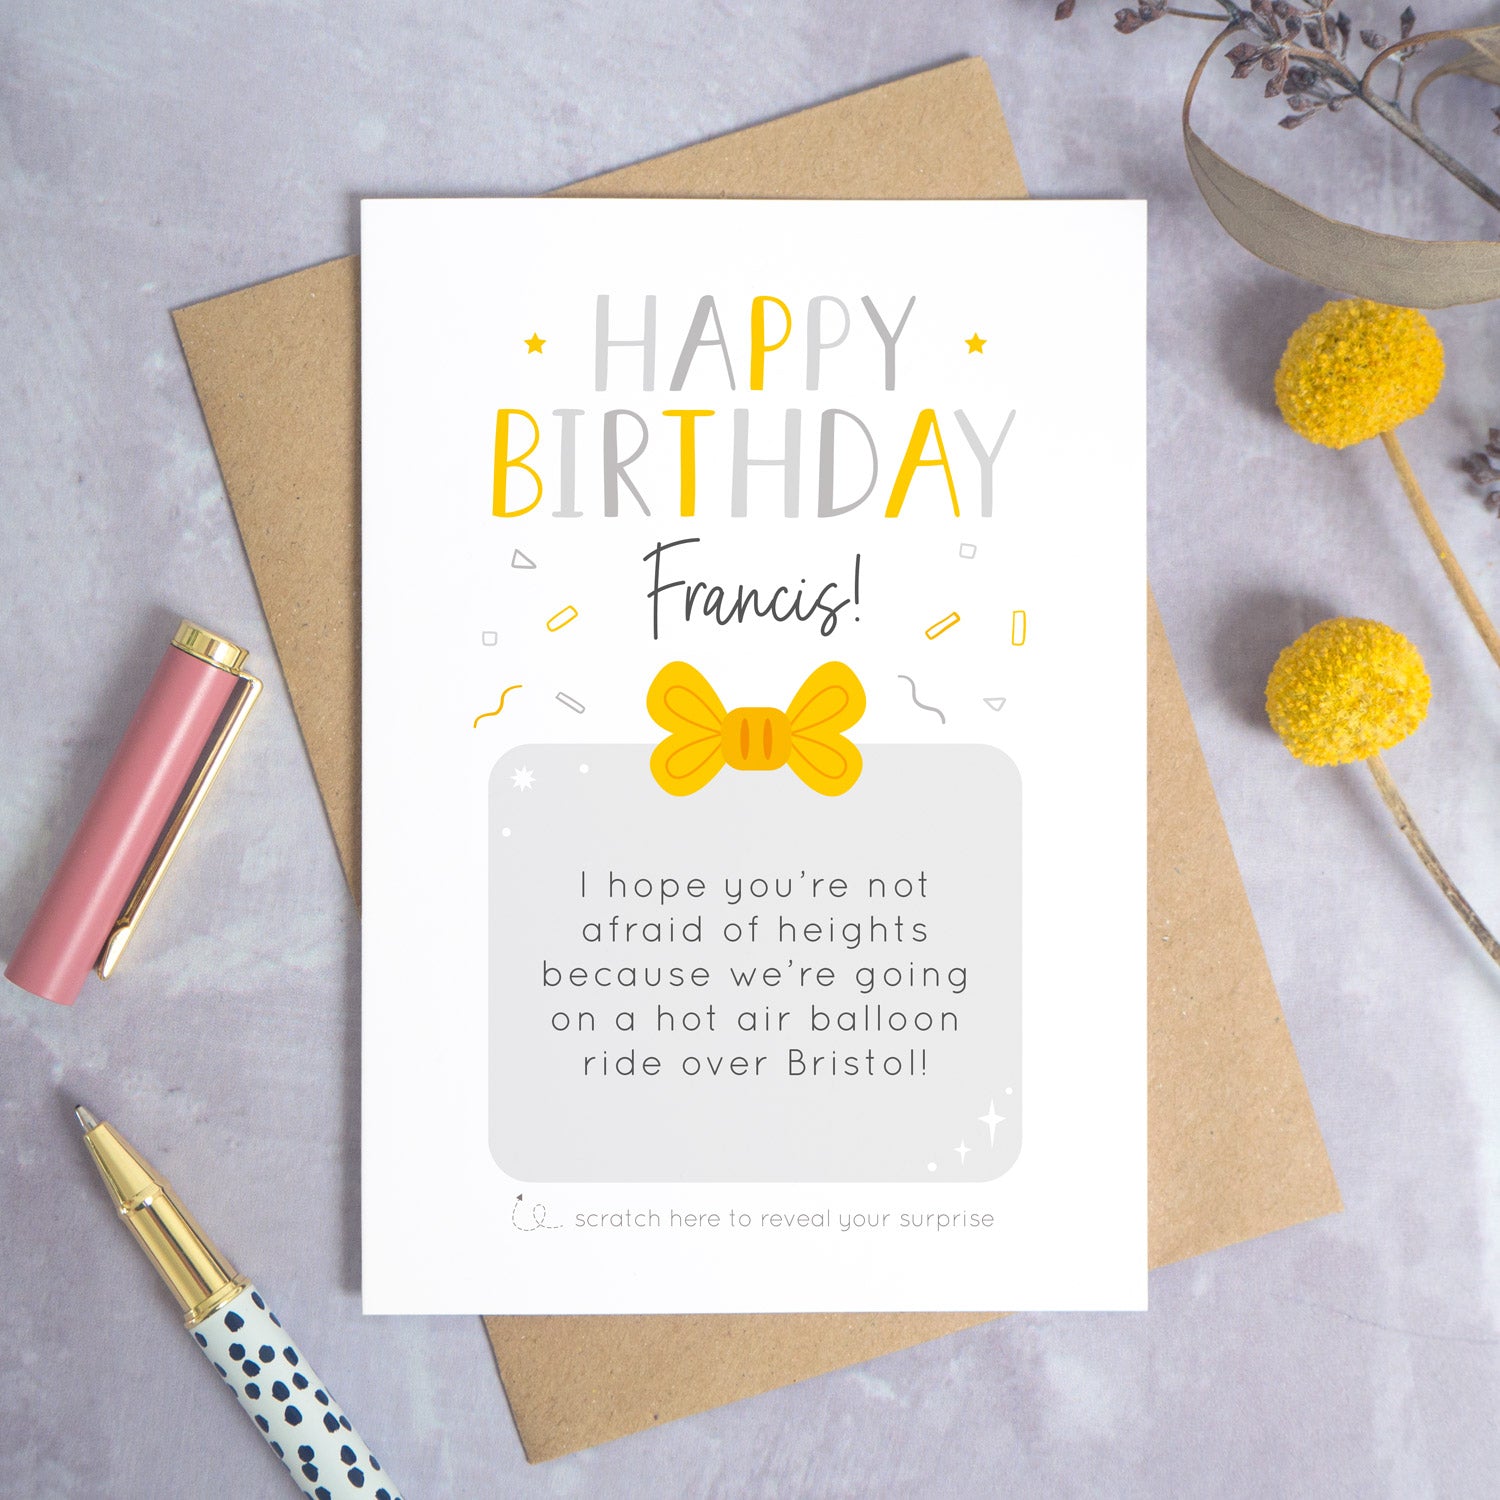 A personalised happy birthday scratch card that has been photographed flat lay style on a grey concrete style background surrounded with foliage and a pen. The card itself shows how it would look once the gold panel has been completely removed. 